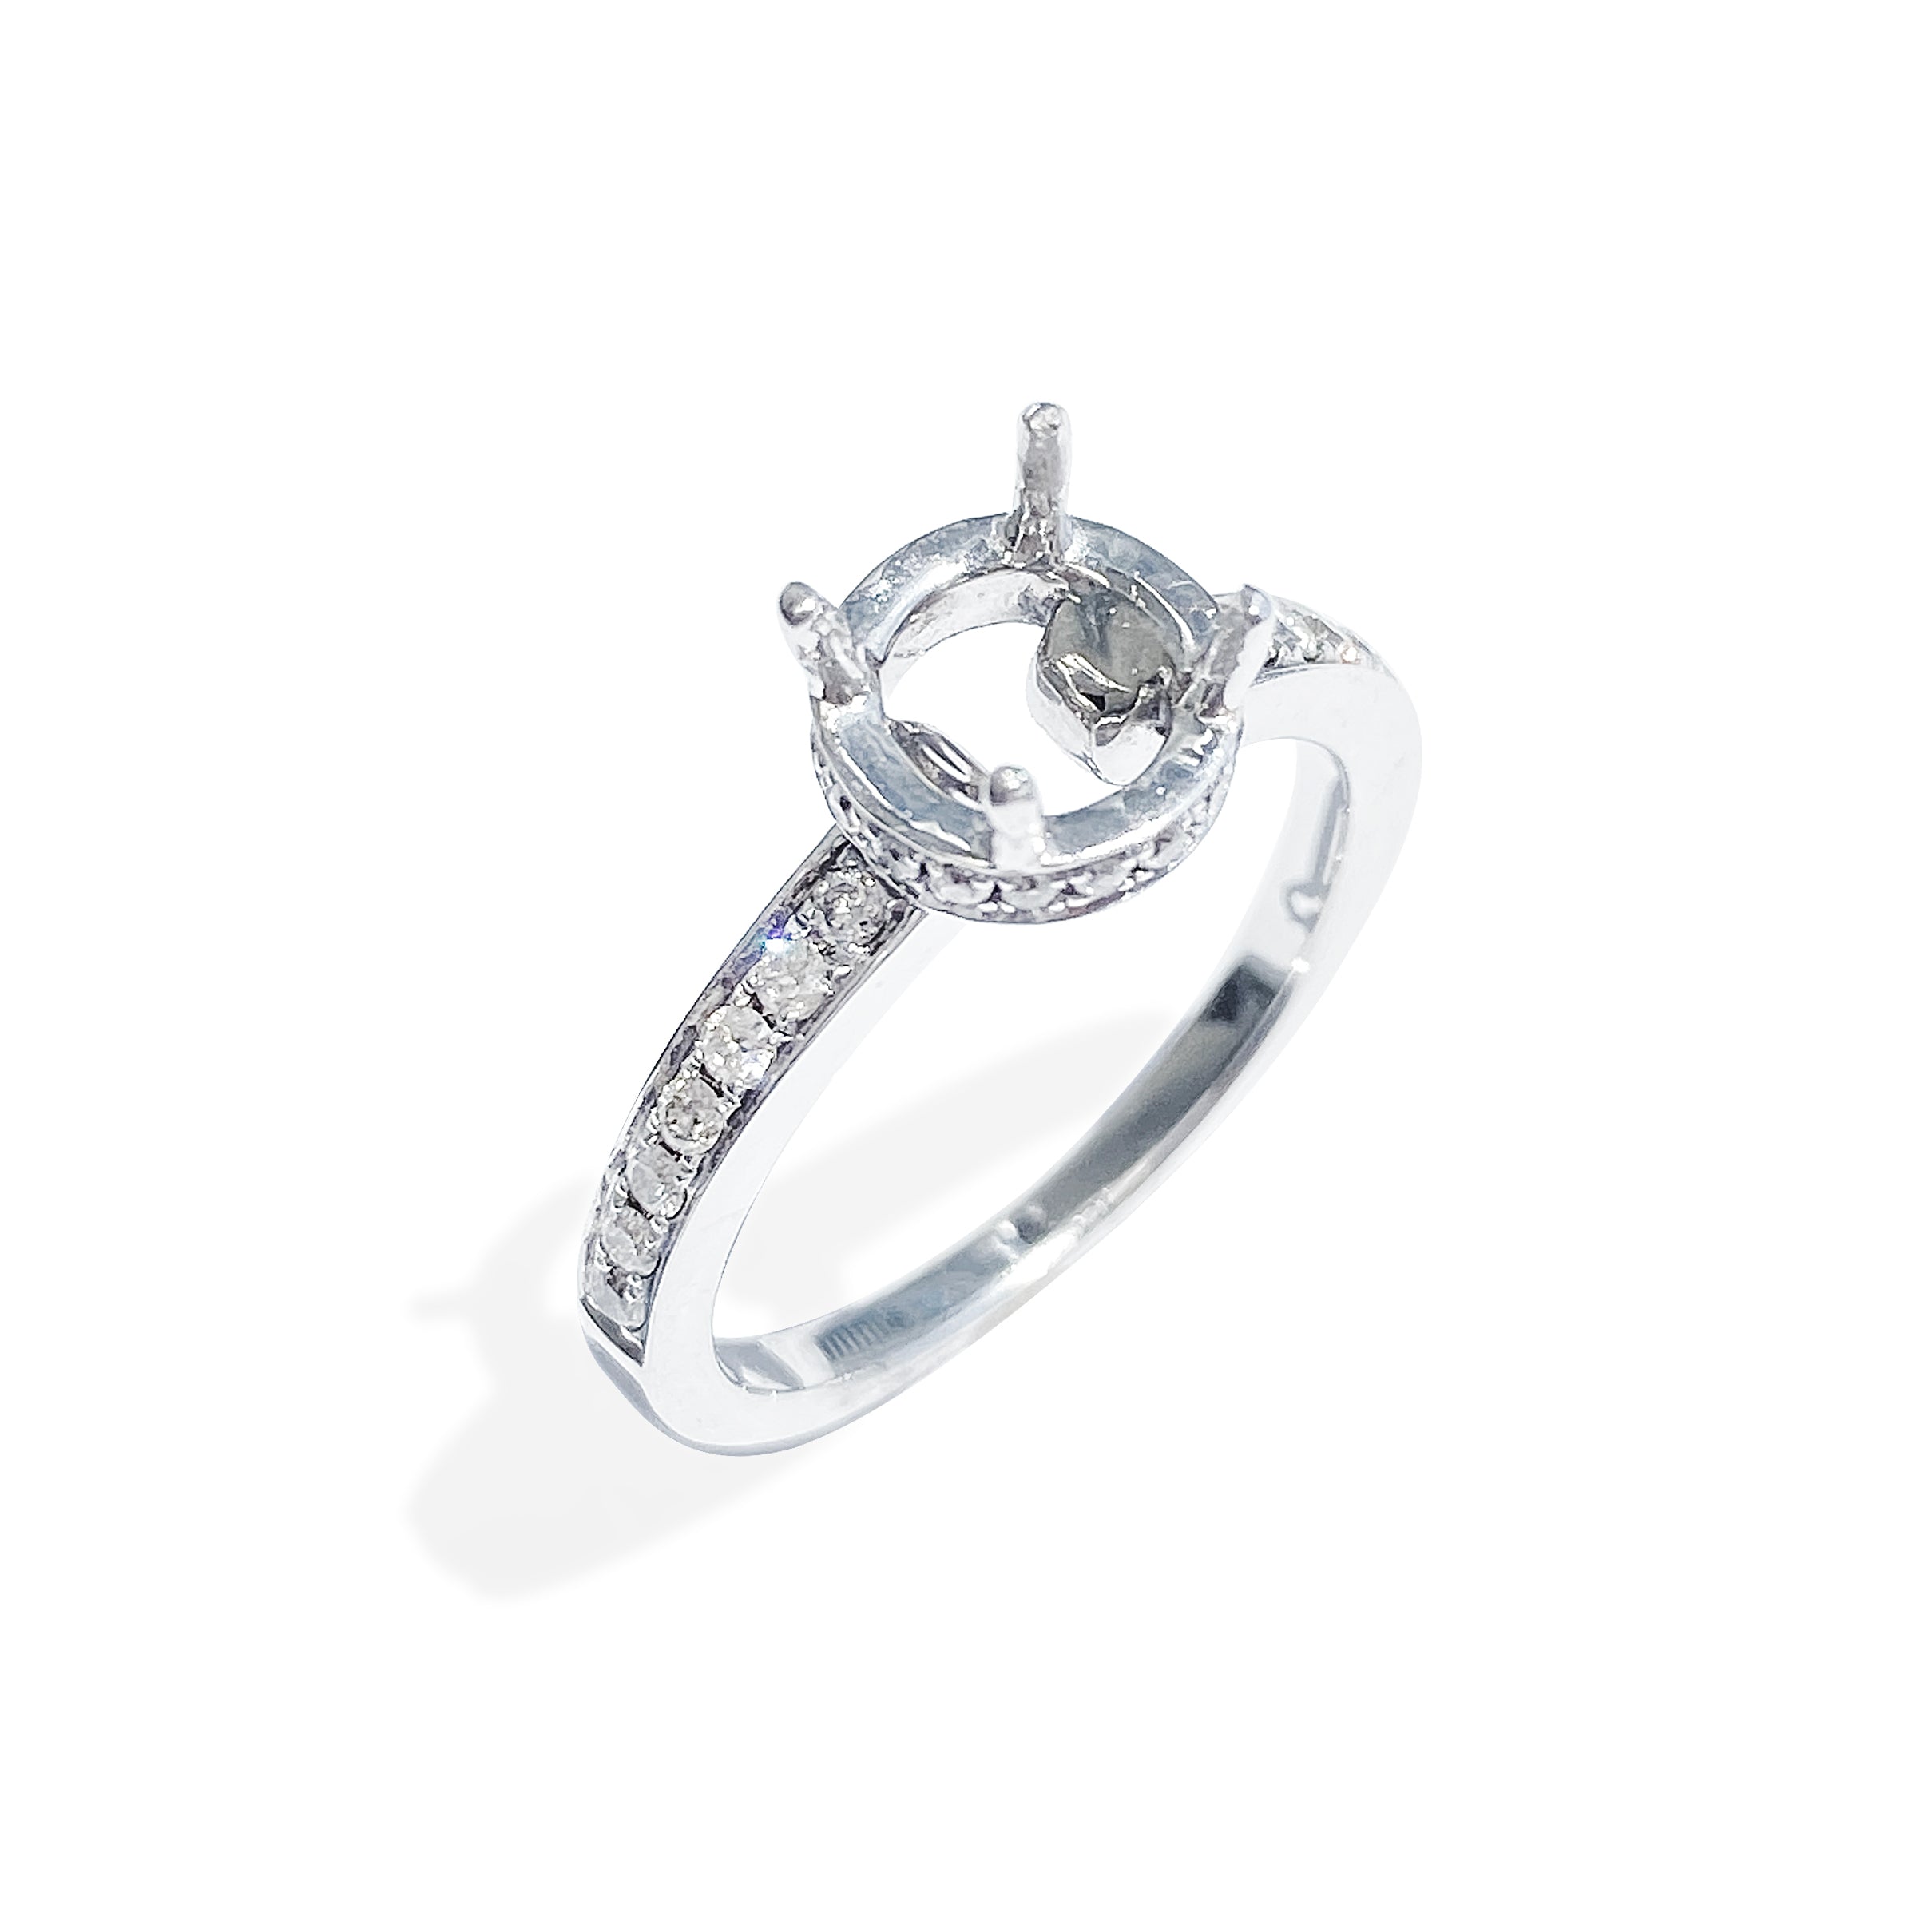 Channel Diamond Setting with Hidden Halo